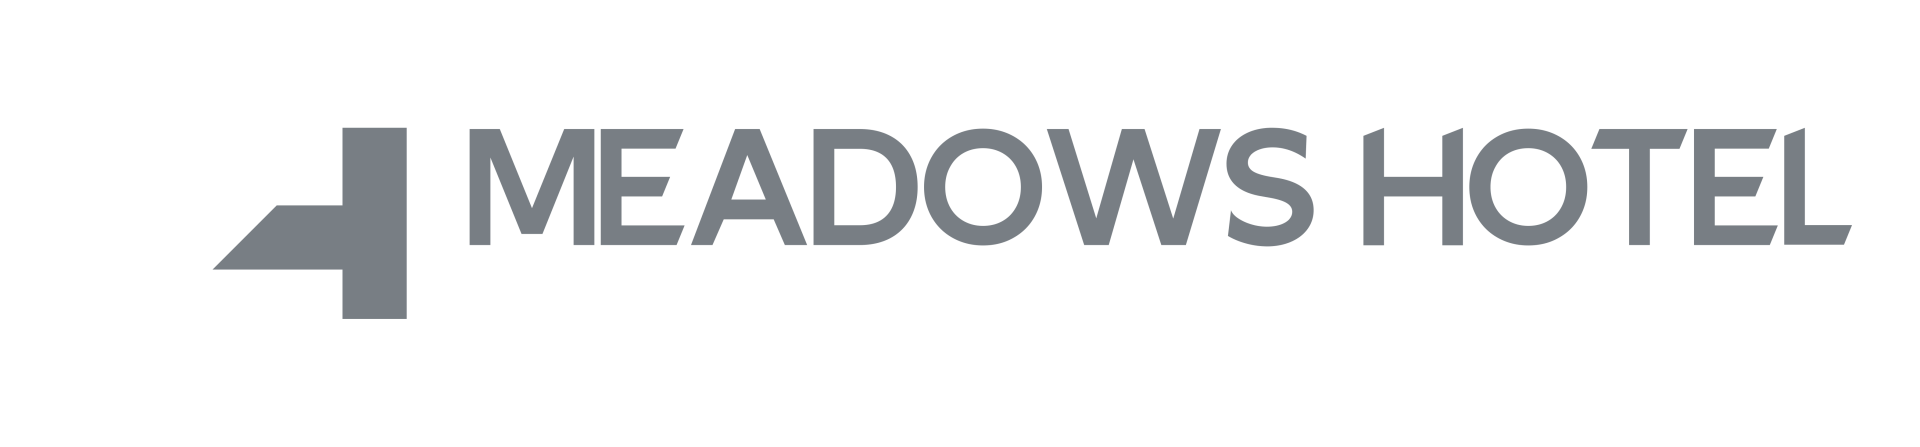 Welcome to Meadows Hotel – Your Adelaide Hills Pub